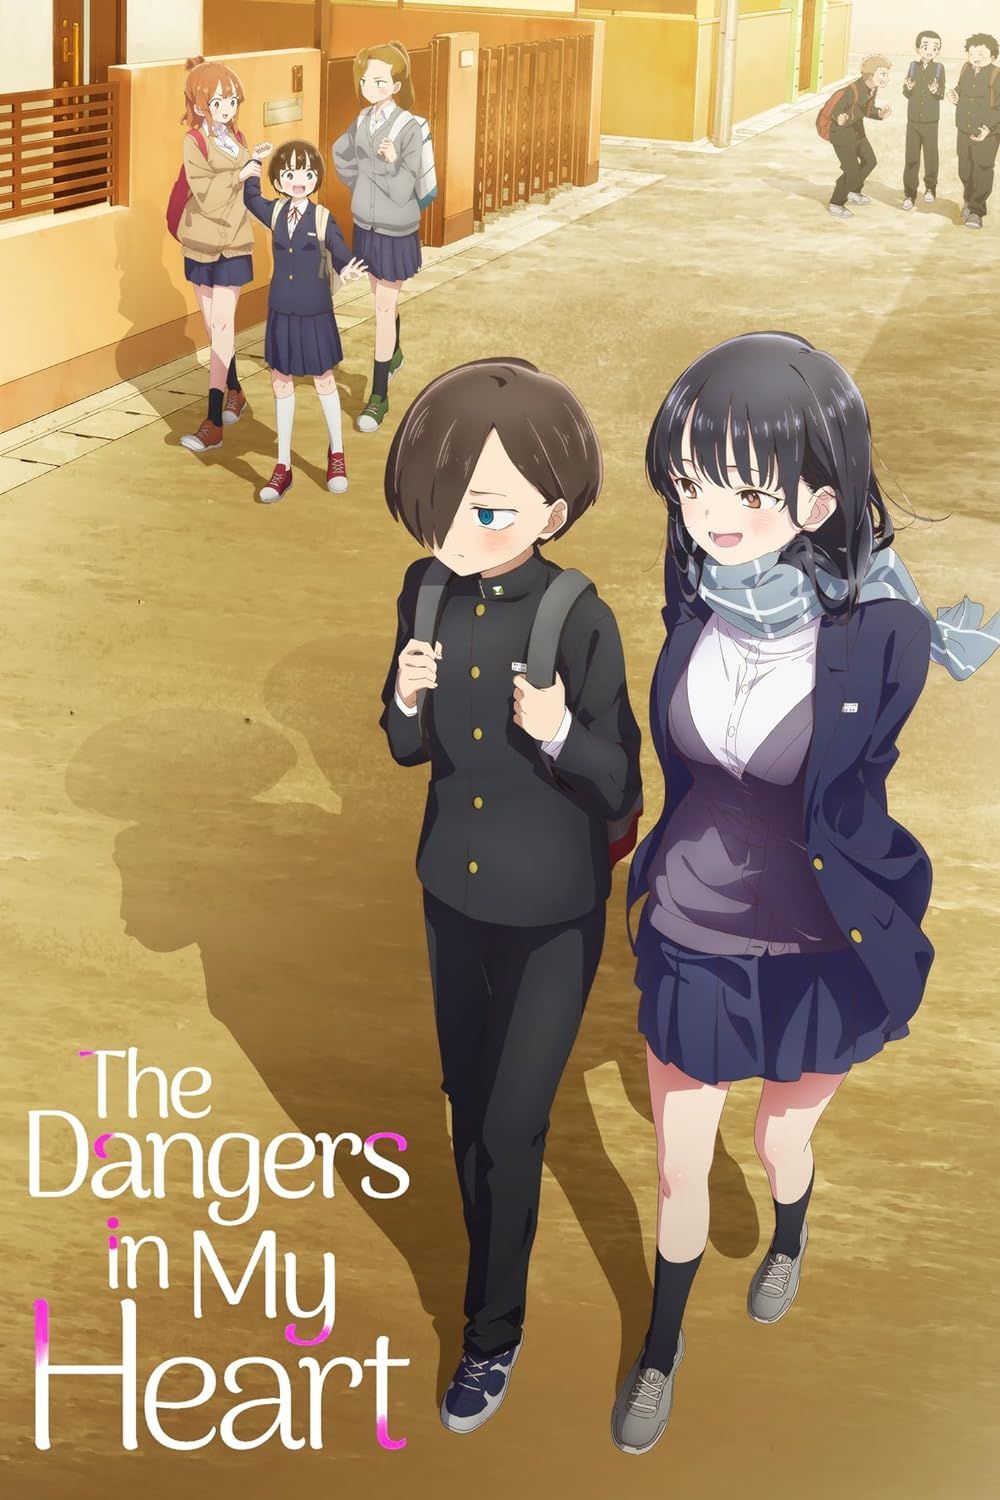 Kyoutarou and Anna Walk Together on The Dangers in My Heart Poster